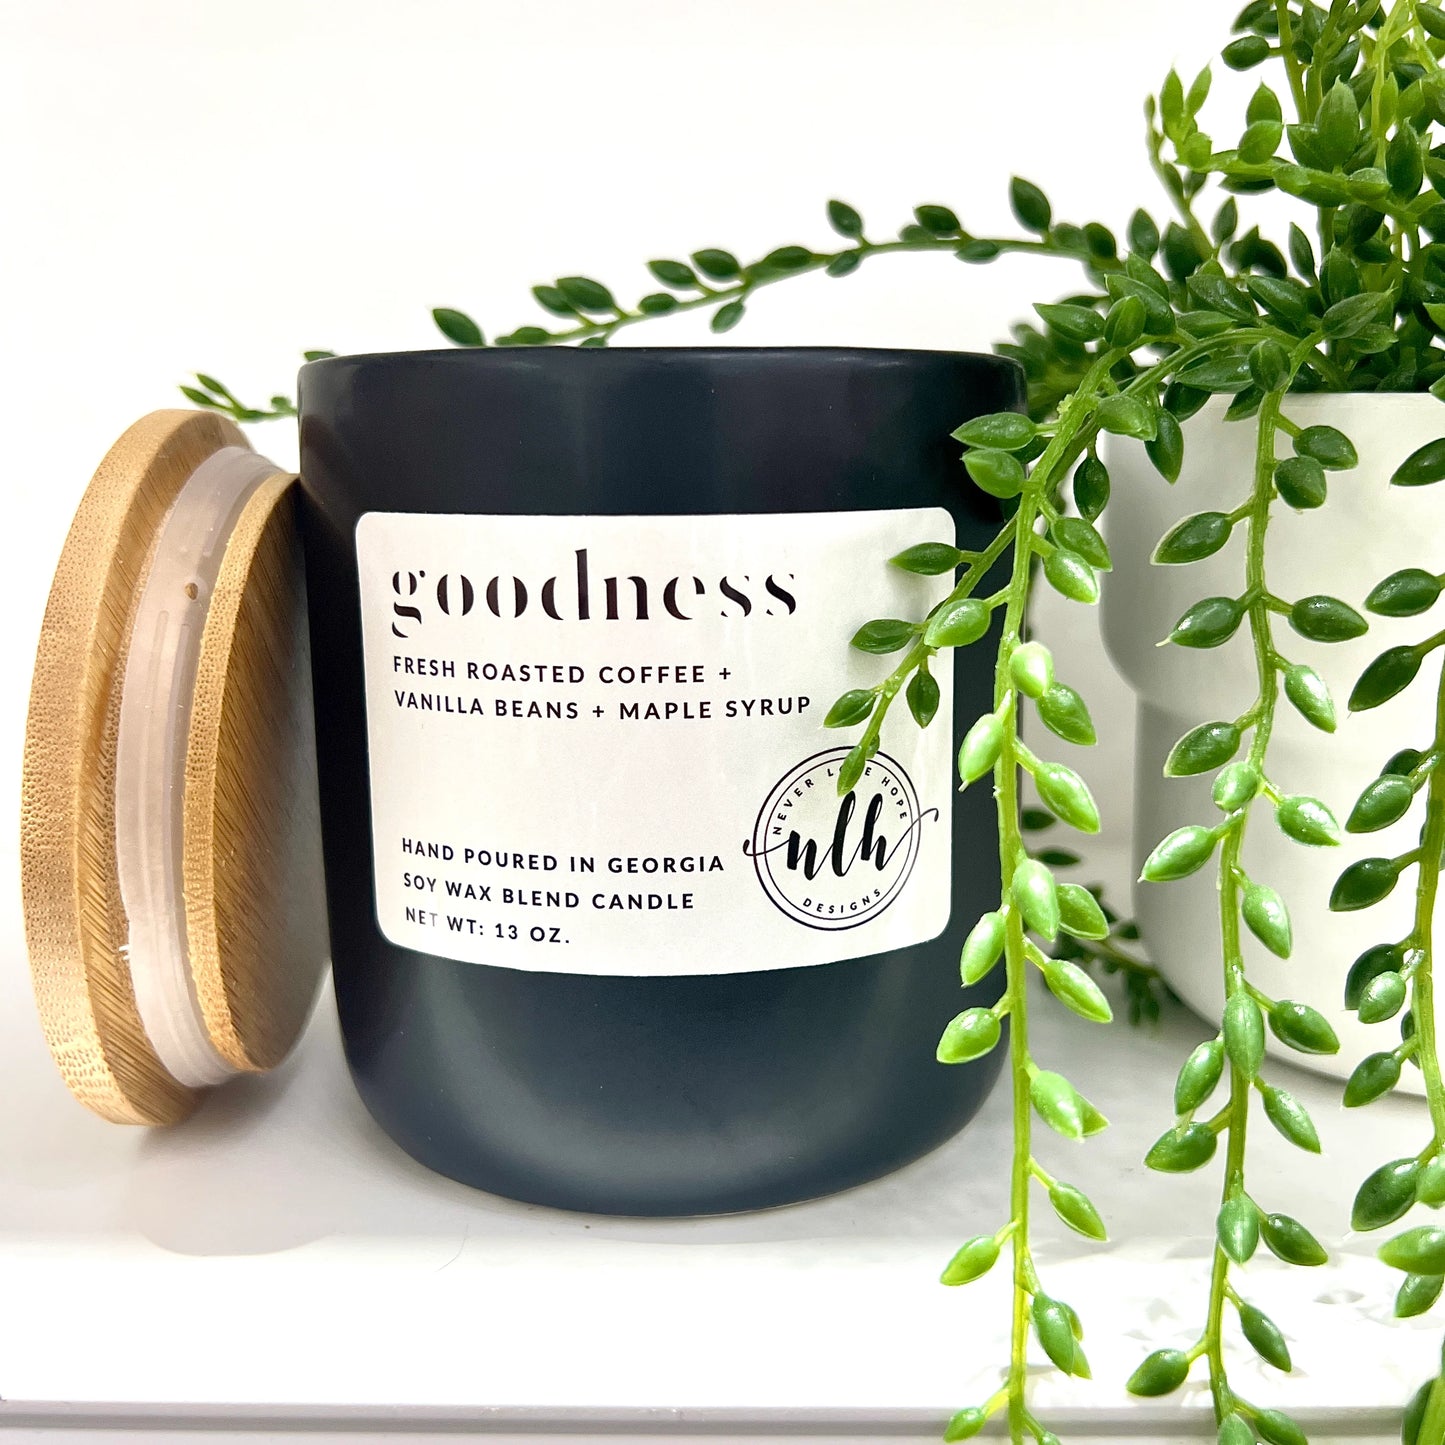 Never Lose Hope® Soy Wax Blend Candle- "Goodness"